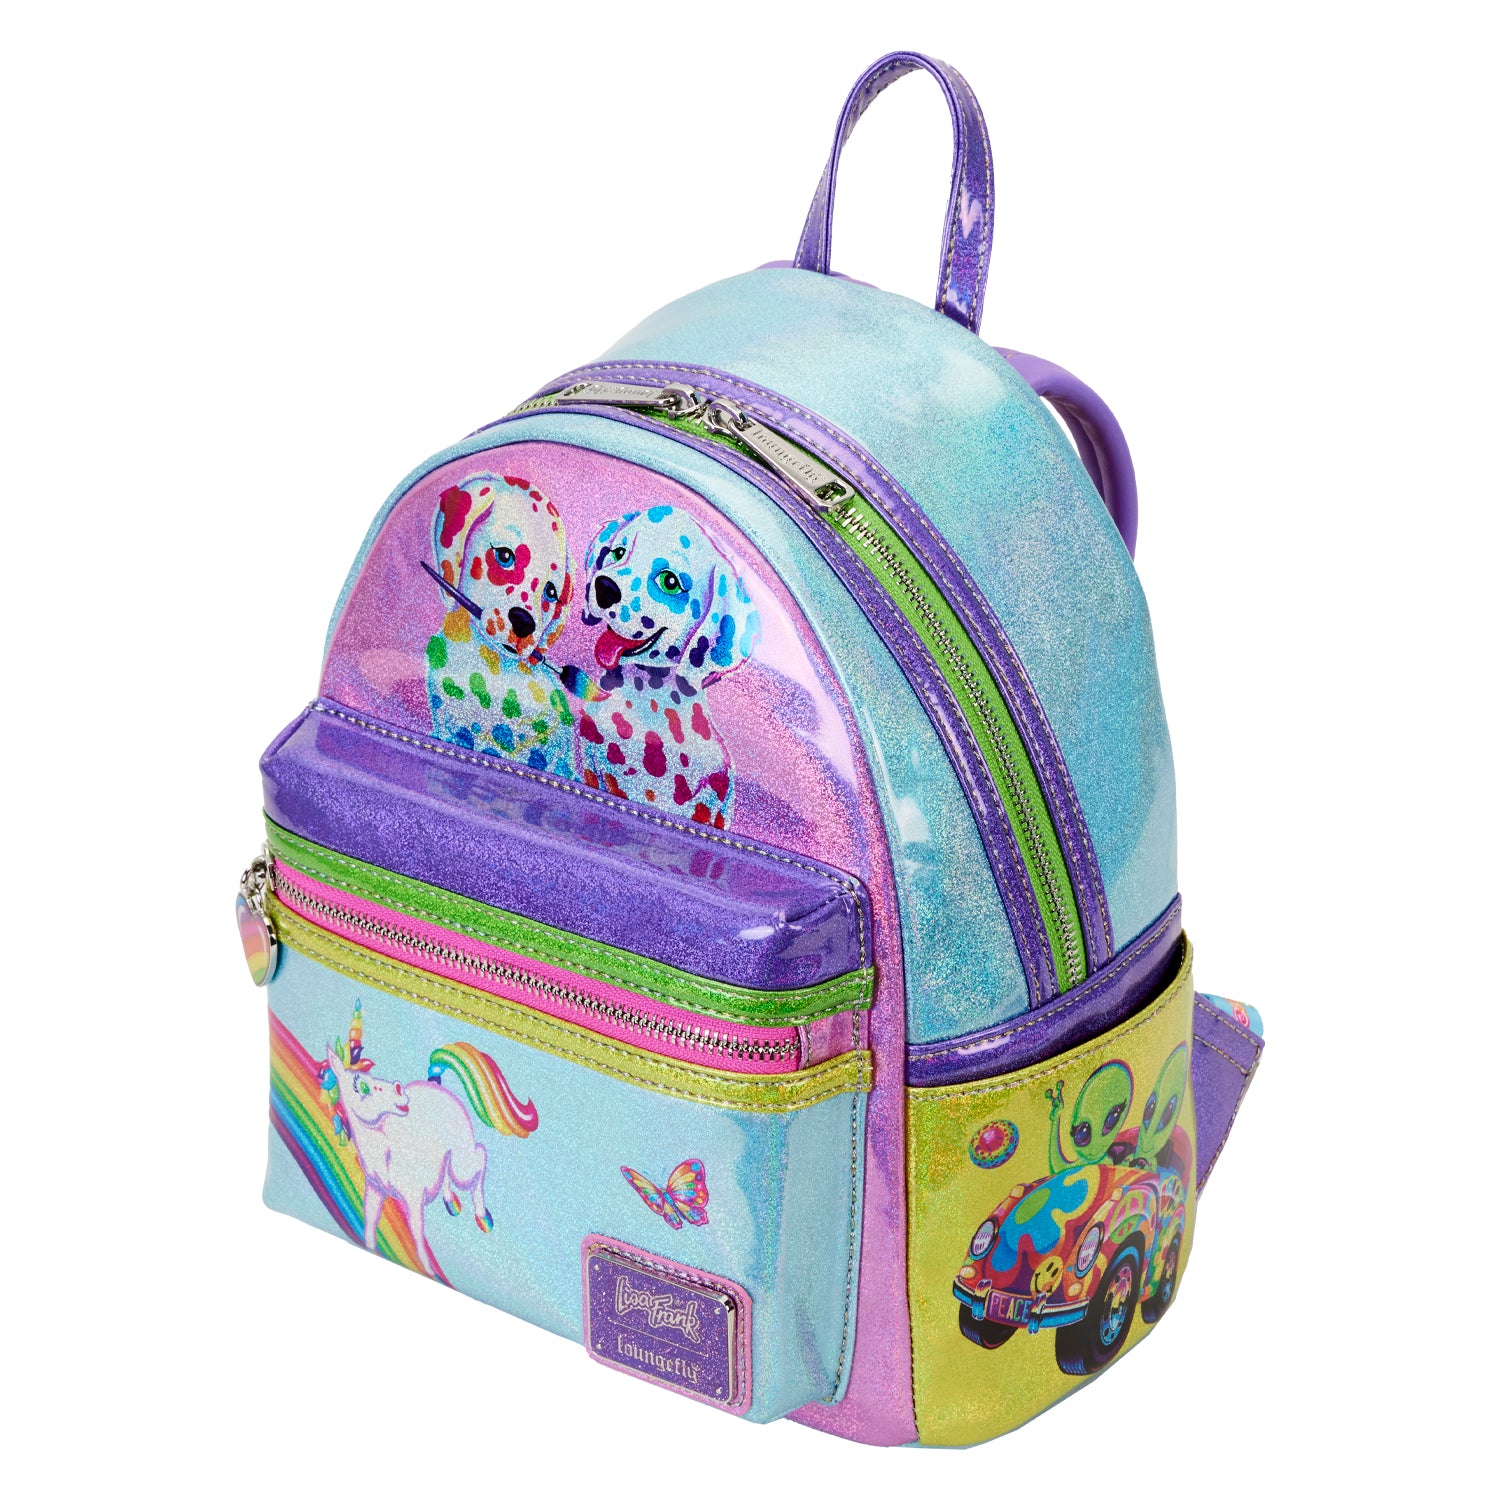 CLAIRE'S Small Backpack Purse - Cute Backpack India